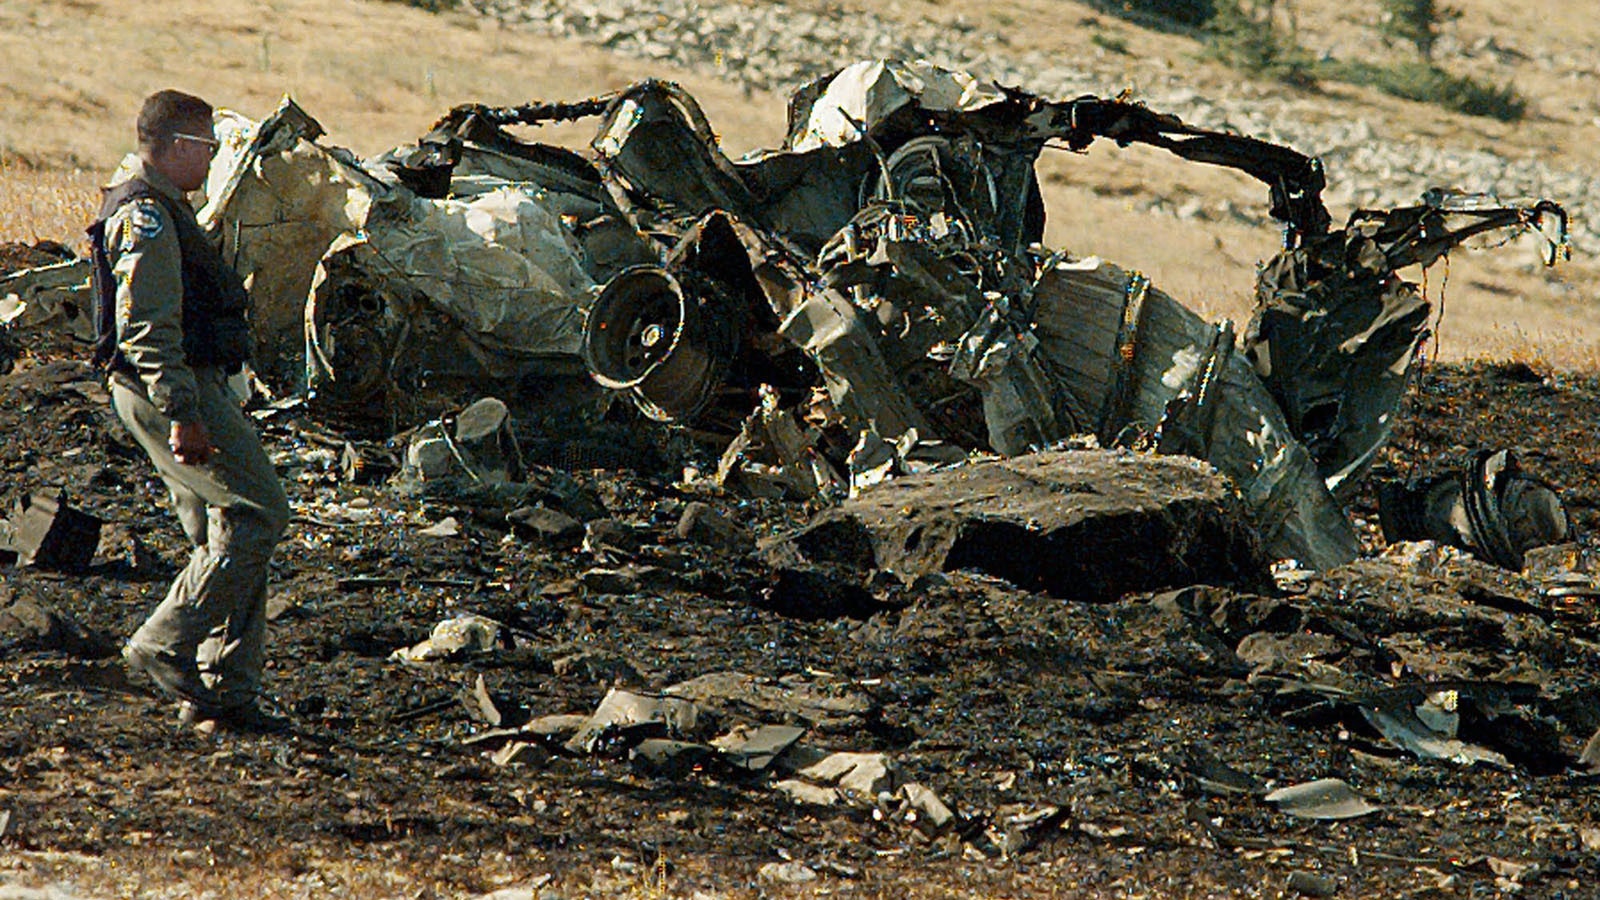 A investigator walks past the burned wreckage of the Secret Service communication vehicle that was on board the Air Force C-130 that crashed and burned on a mountain near Jackson, Wyoming on Aug. 17, 1996.  The C-130 carried support equipment for President Clinton's vacation. Nine people were killed, including a Secret Service agent.